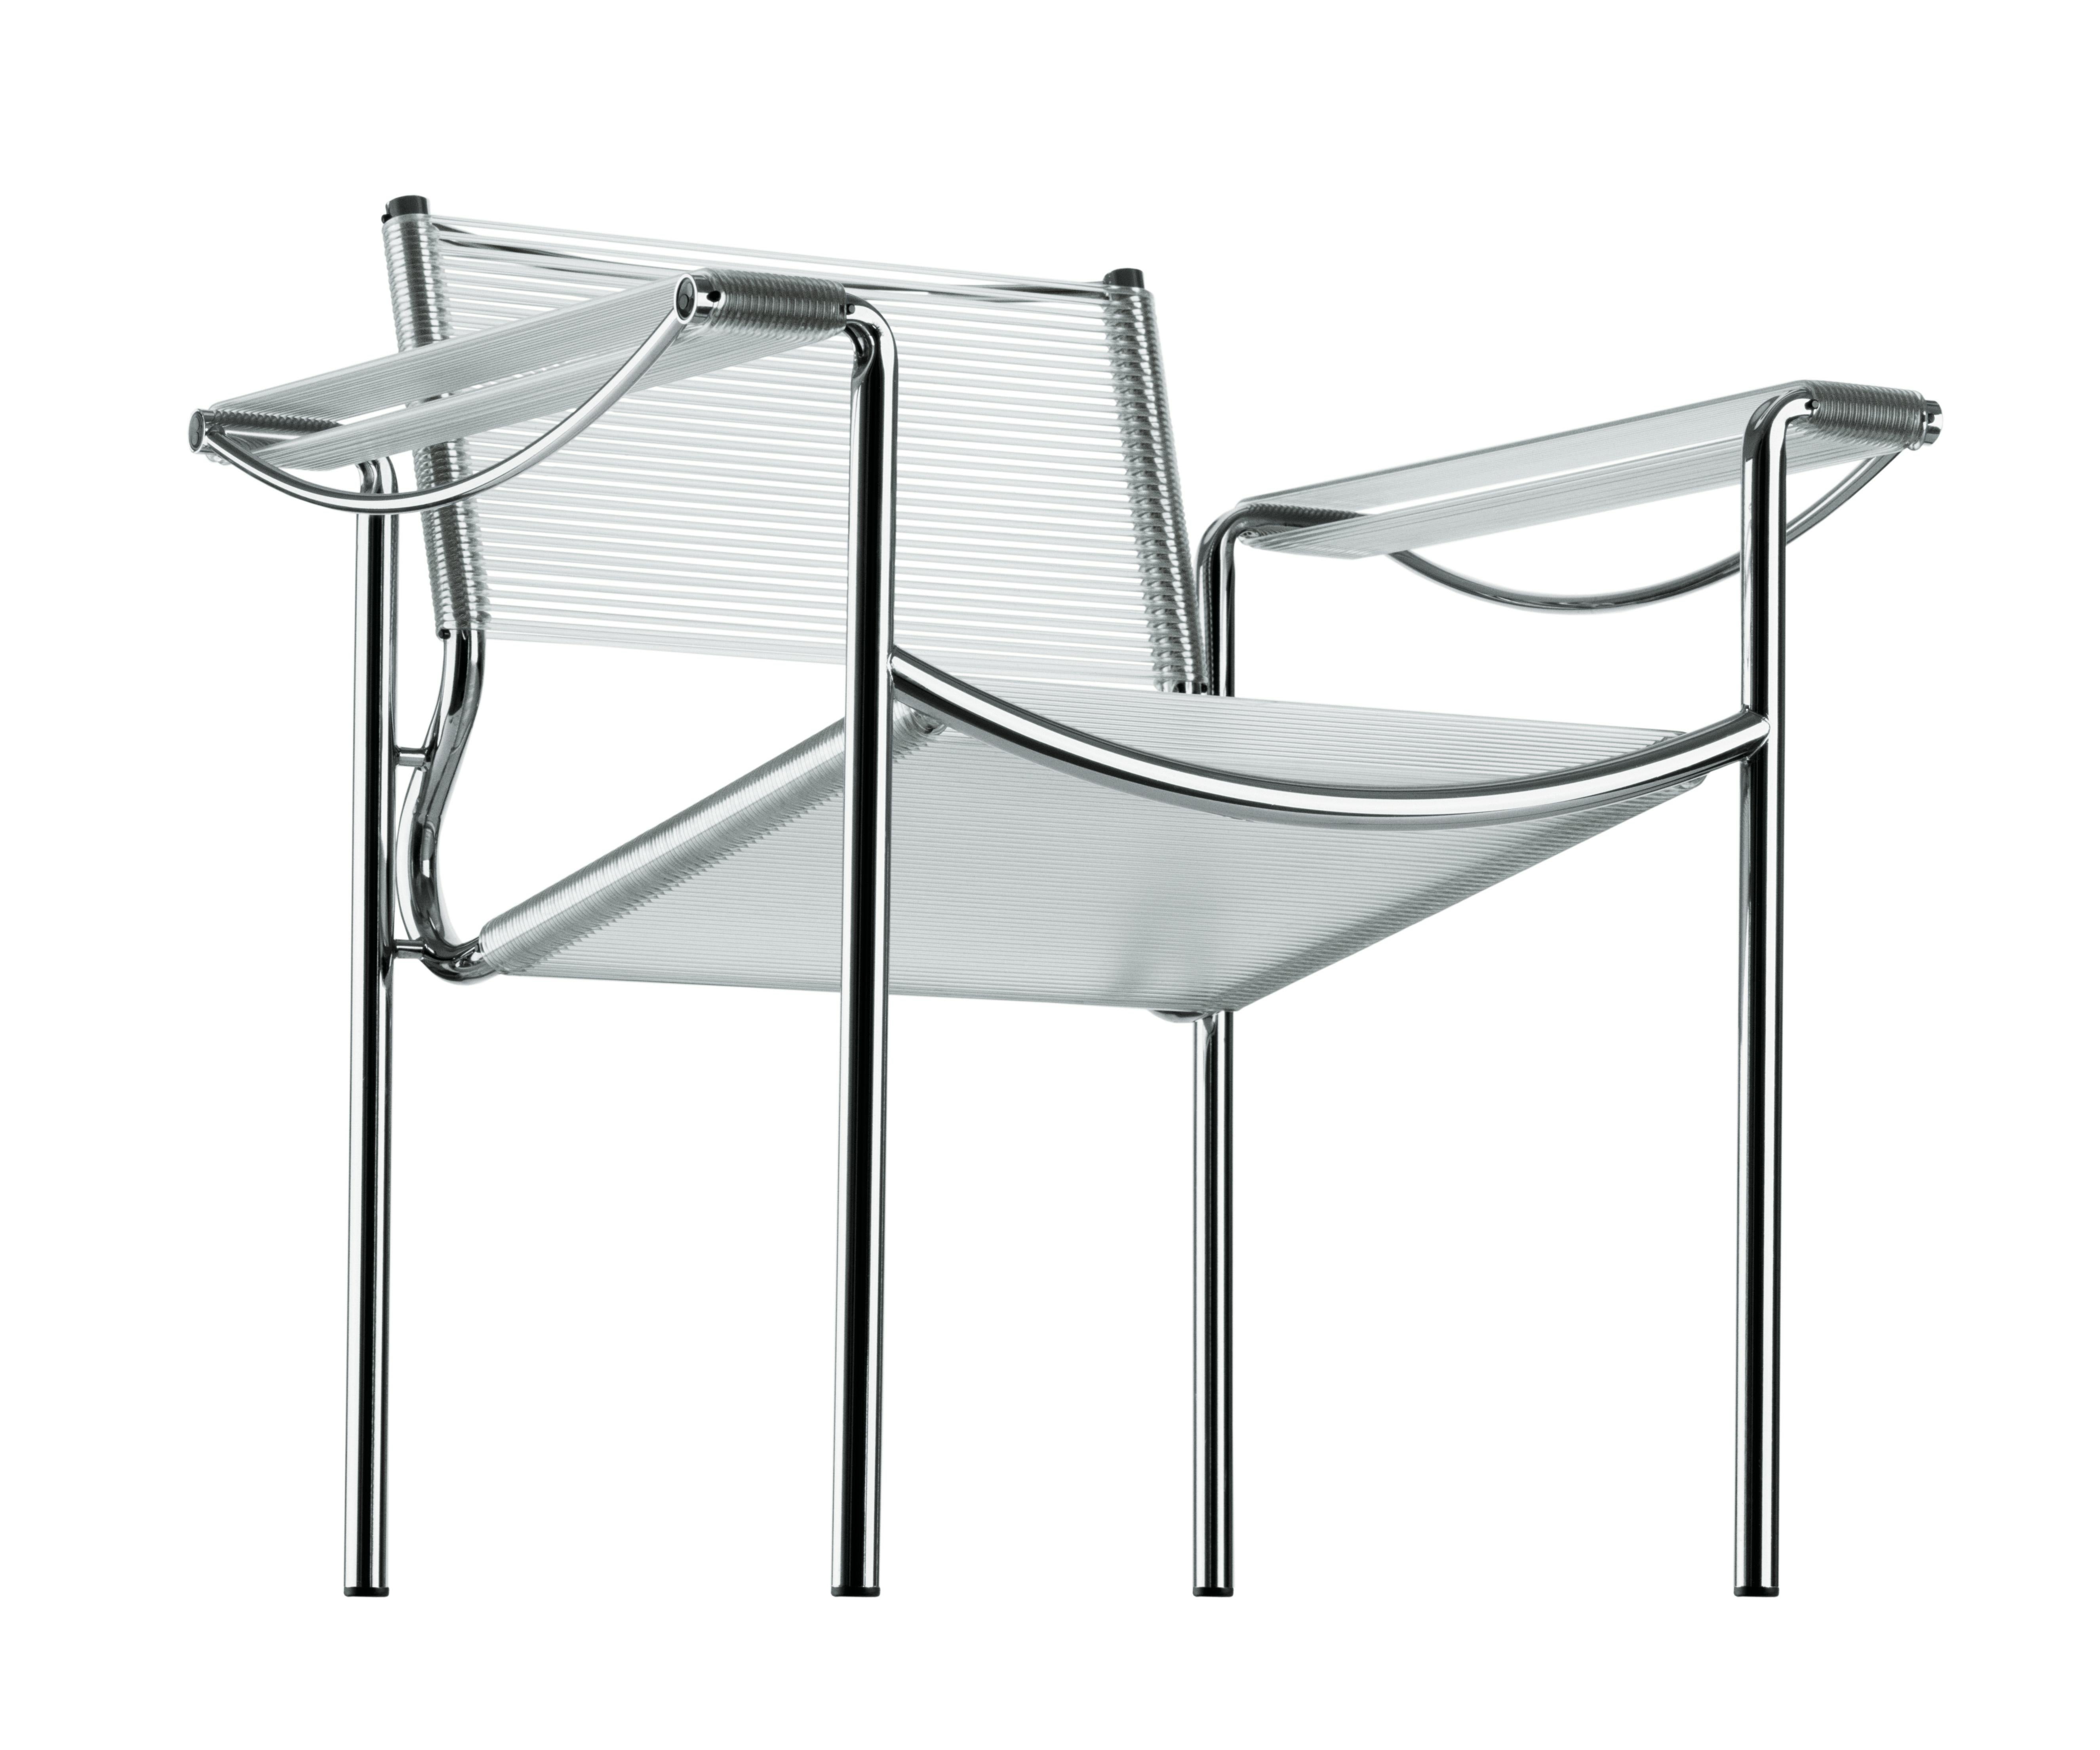 Alias 109 Spaghetti Armchair with Clear PVC Seat and Chromed Steel Frame by Giandomenico Belotti

Stacking armchair with structure in chromed or lacquered steel, seat, back and arms in PVC.

(1922-2004) After graduating in architecture from the